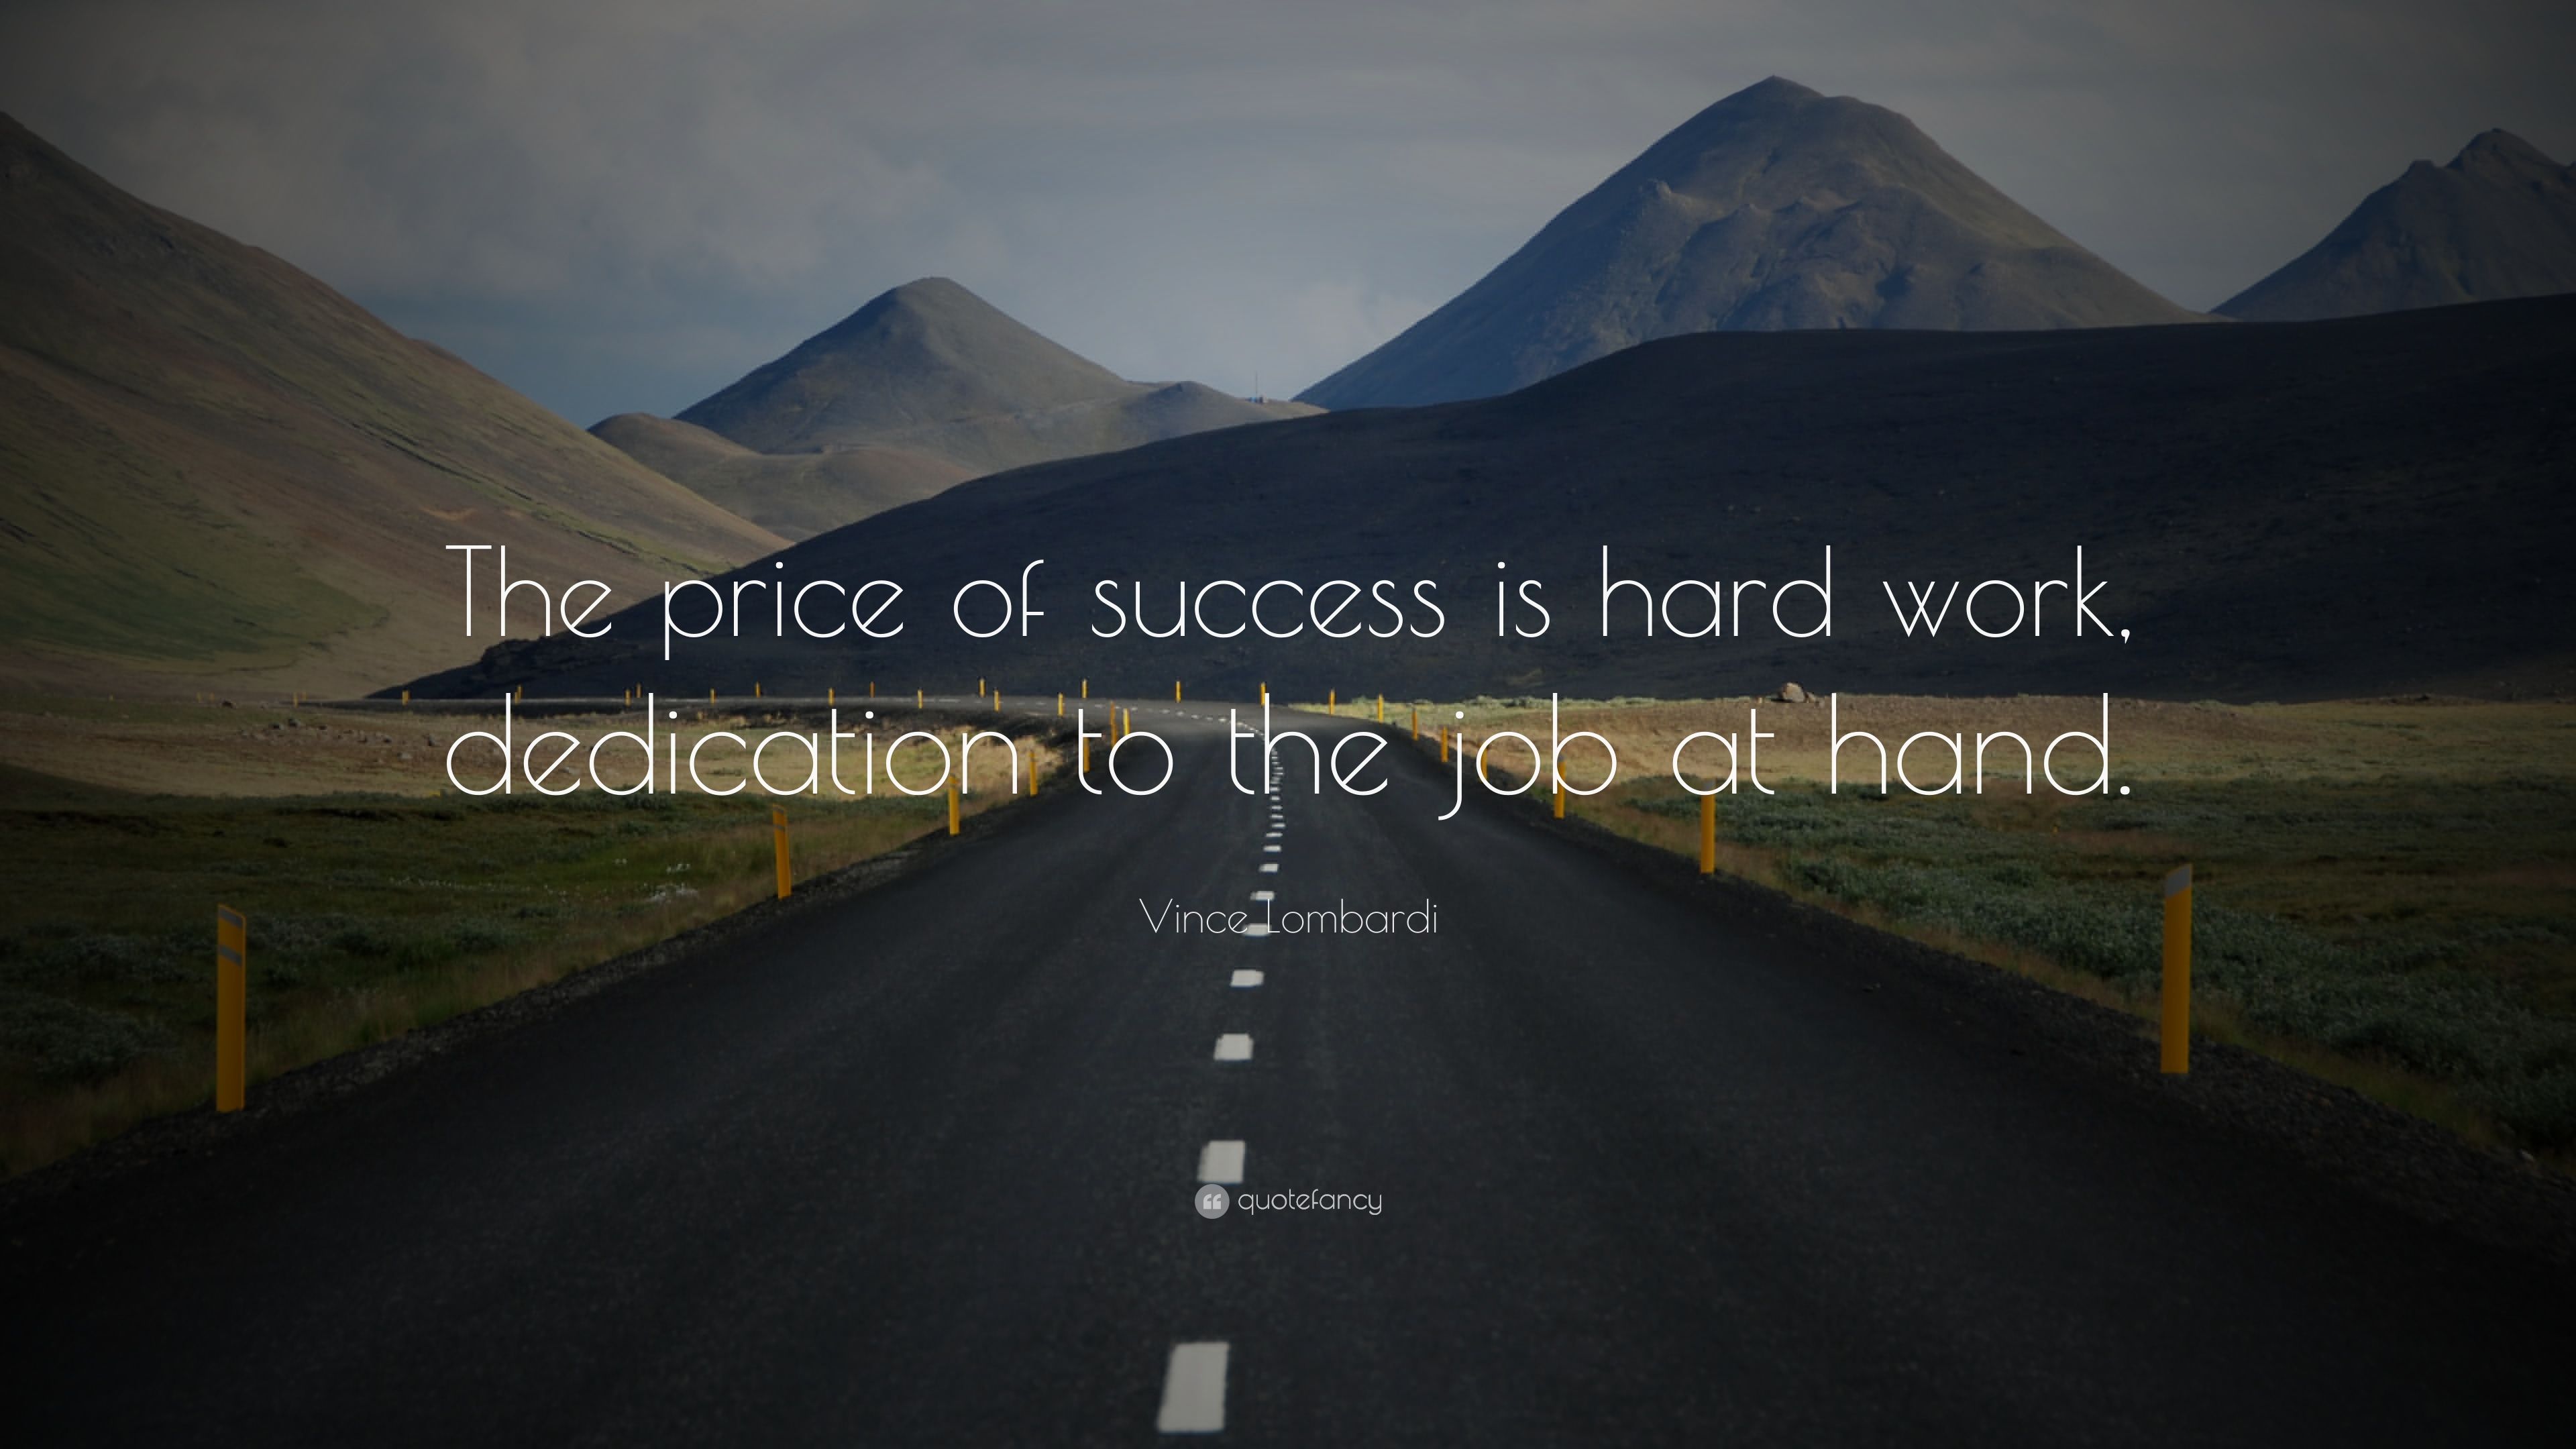 Vince Lombardi Quote: “The price of success is hard work